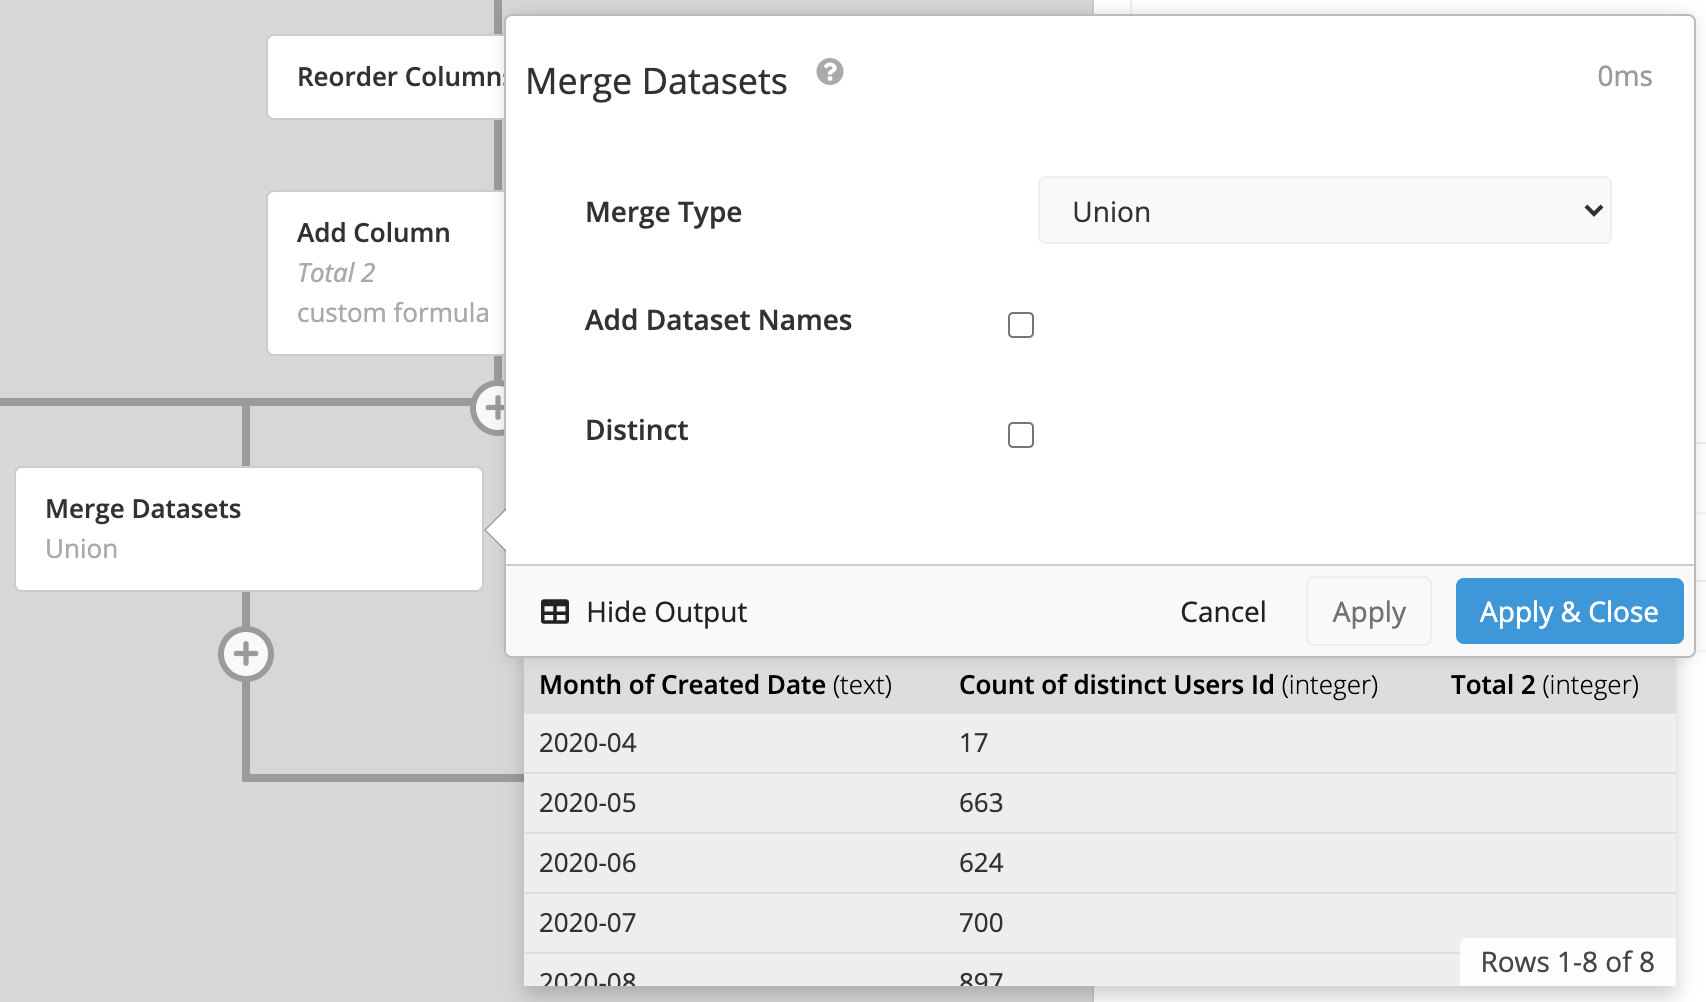 Merge datasets with Union